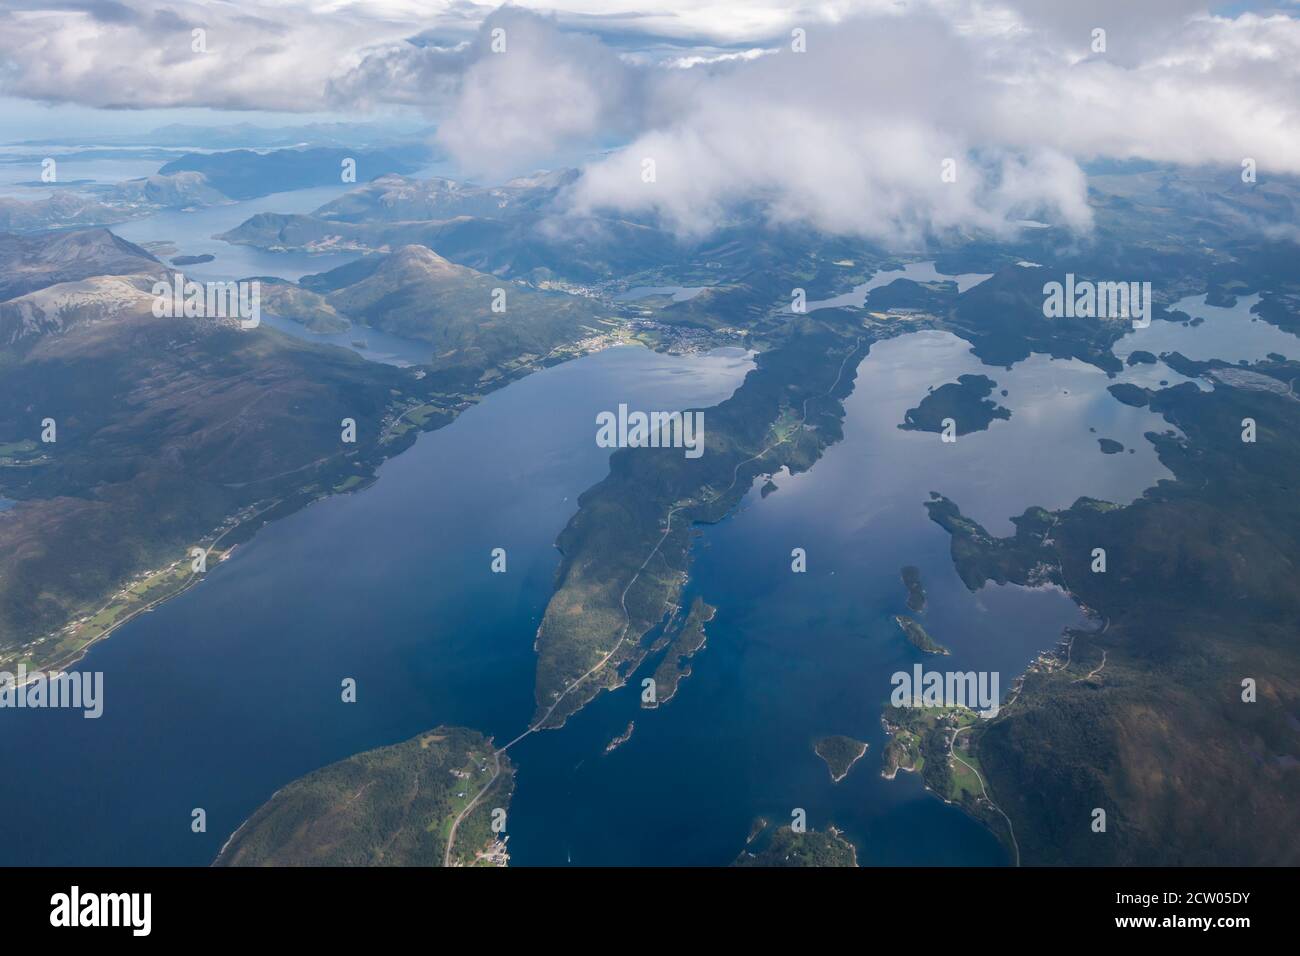 Aerial view of fjords in Norway, from an airplane Stock Photo